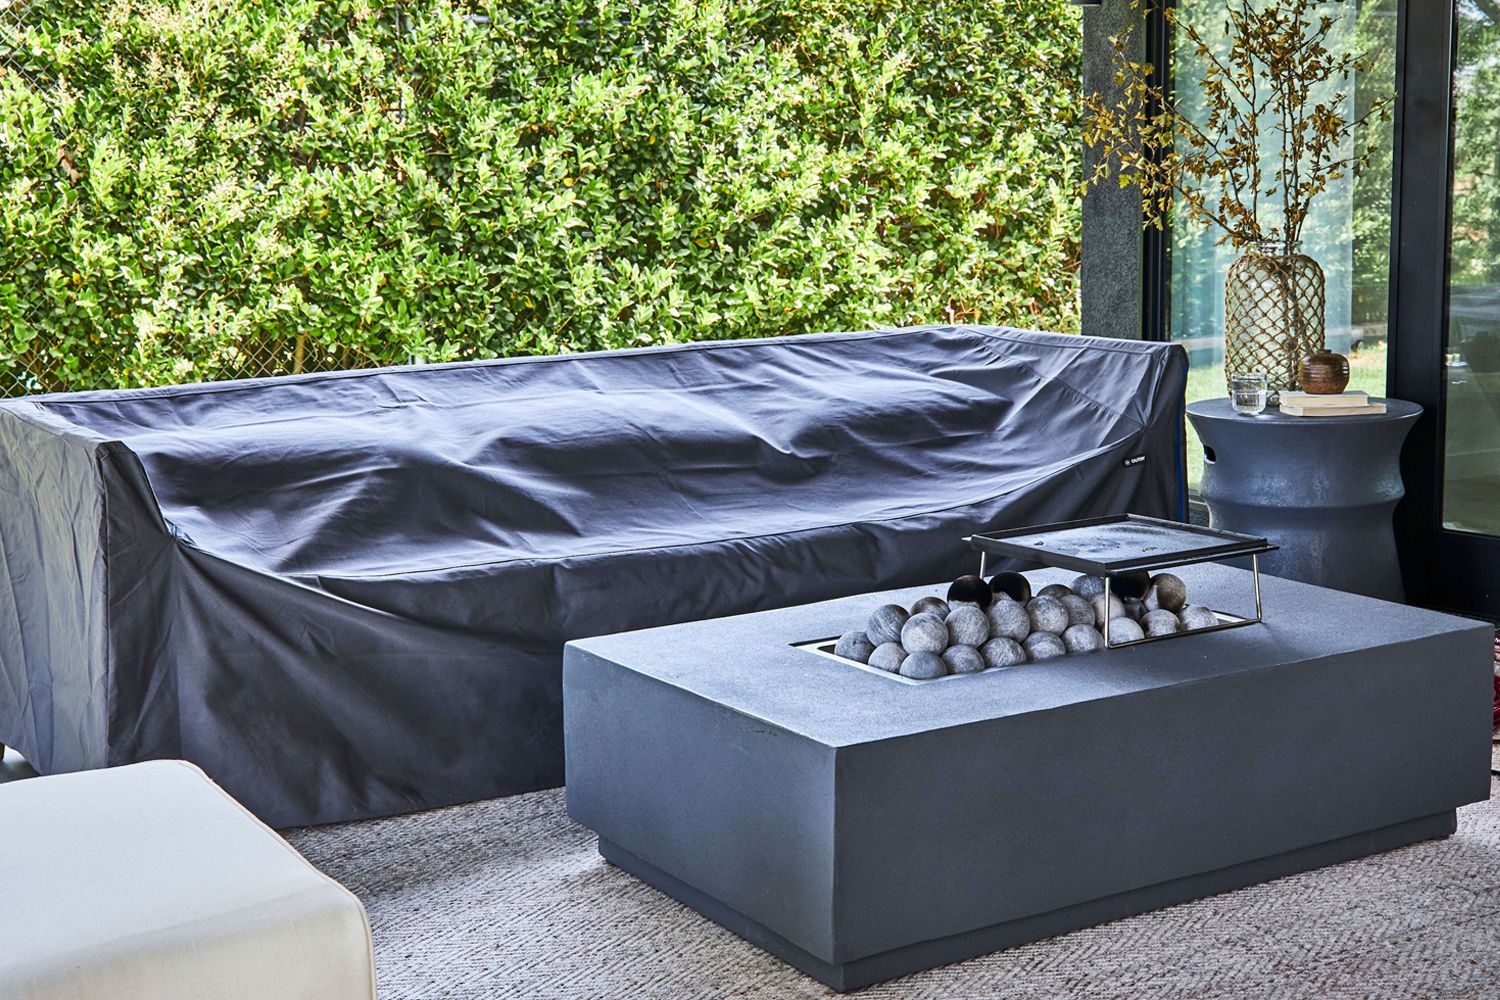 How to Keep Patio Furniture Cover from Blowing Away